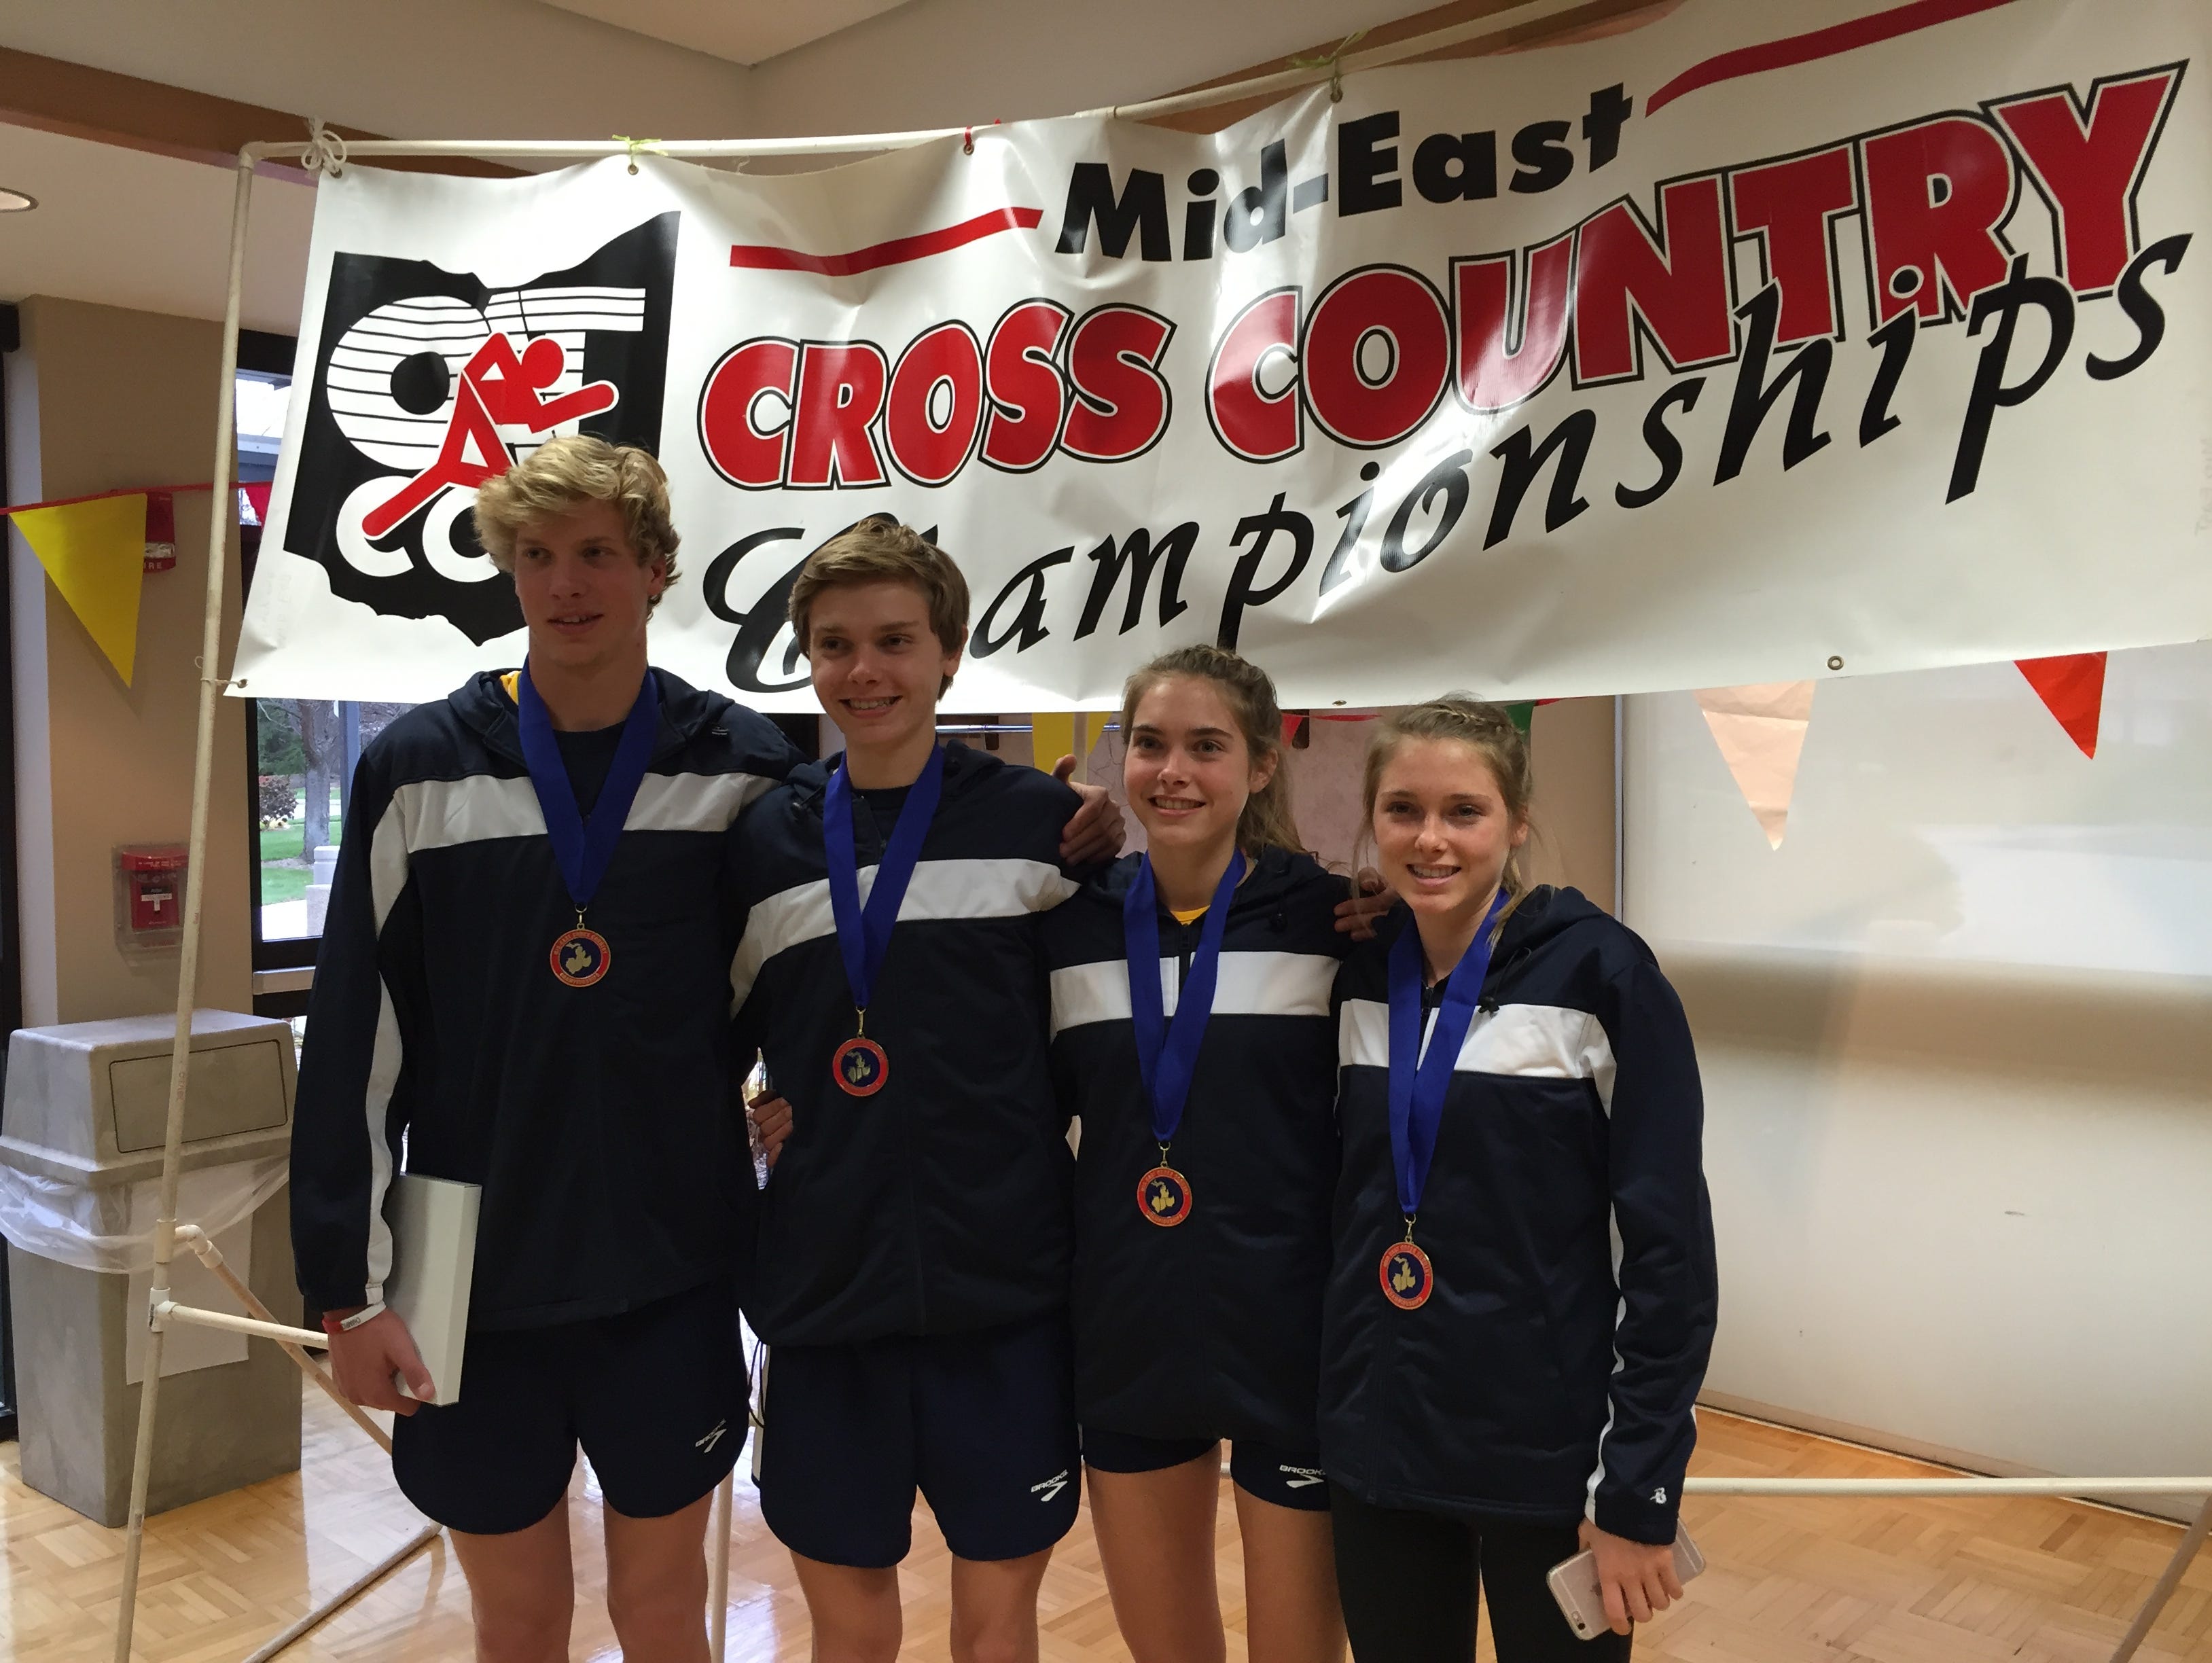 Cooper Williams, from left, Evan Johnson, Kristen Johnson and Lauren Johnson represented West Lafayette at the Mid-East Cross Country Championships on Saturday in Kettering, Ohio.